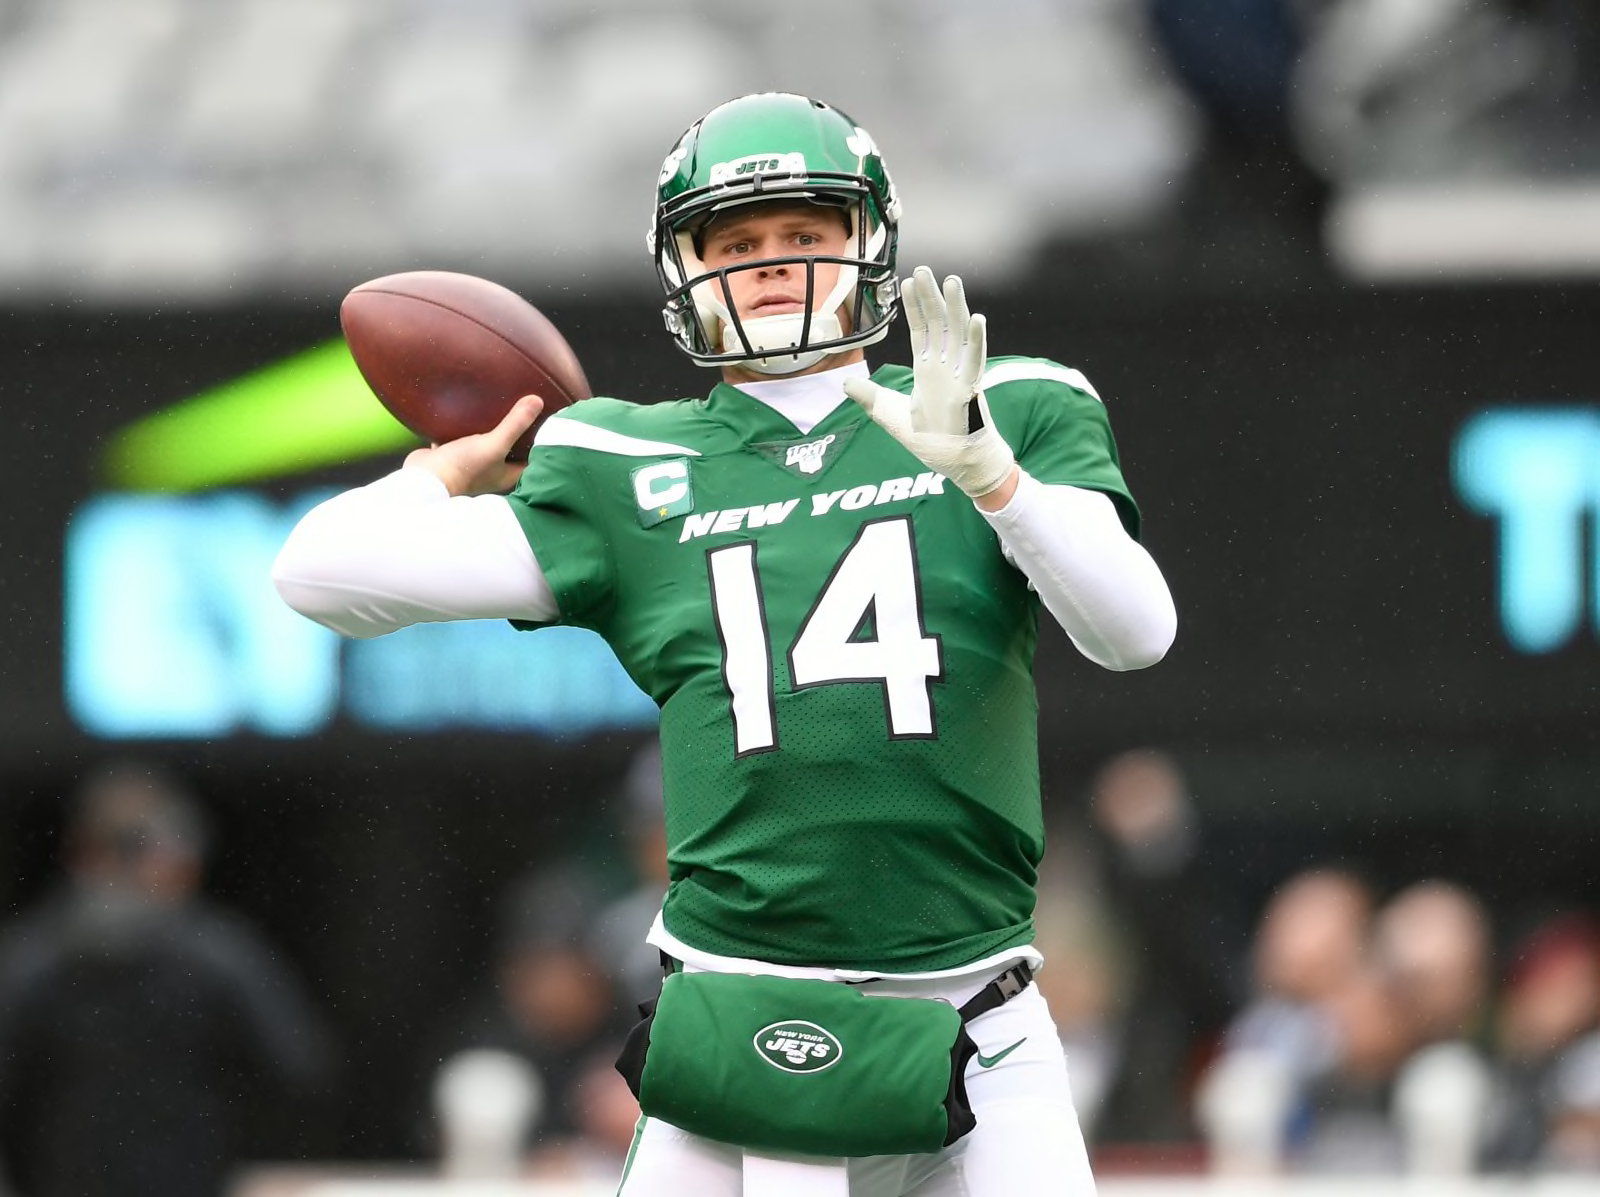 Outlining New York Jets team needs prior to free agency